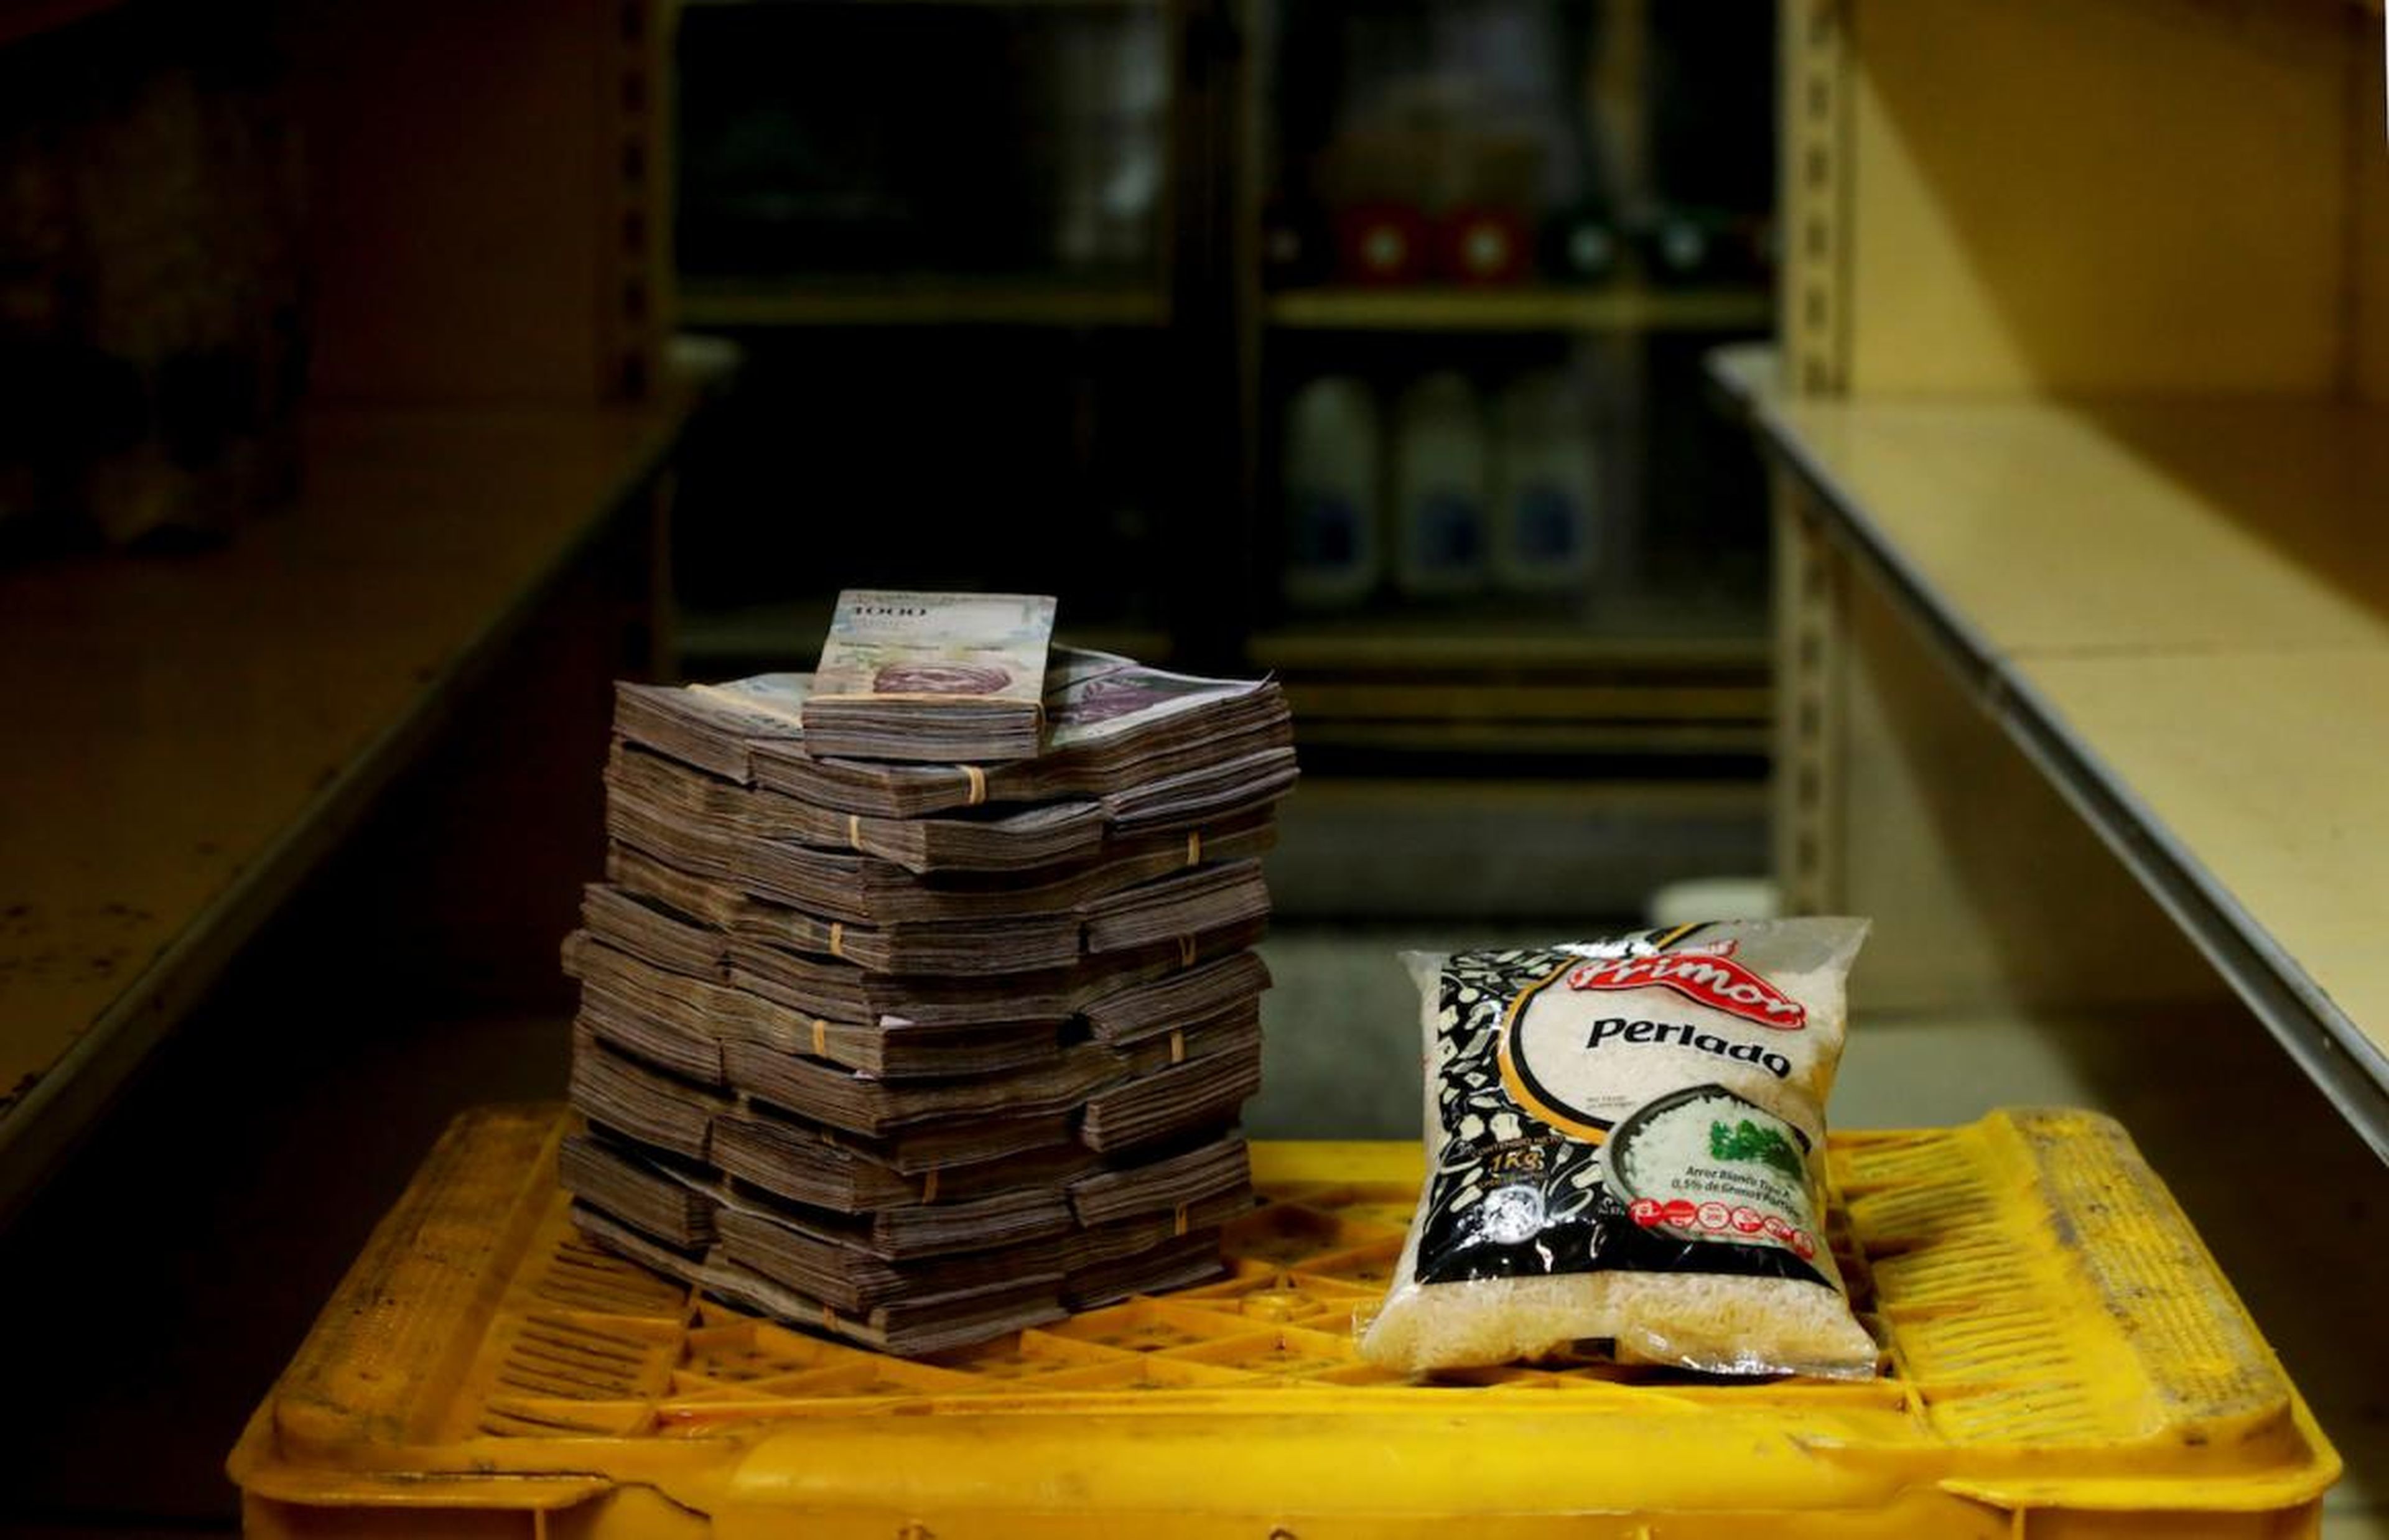 A package of 1kg of rice is pictured next to 2,500,000 bolivars, its price and the equivalent of 0.38 USD, at a mini-market in Caracas, Venezuela.